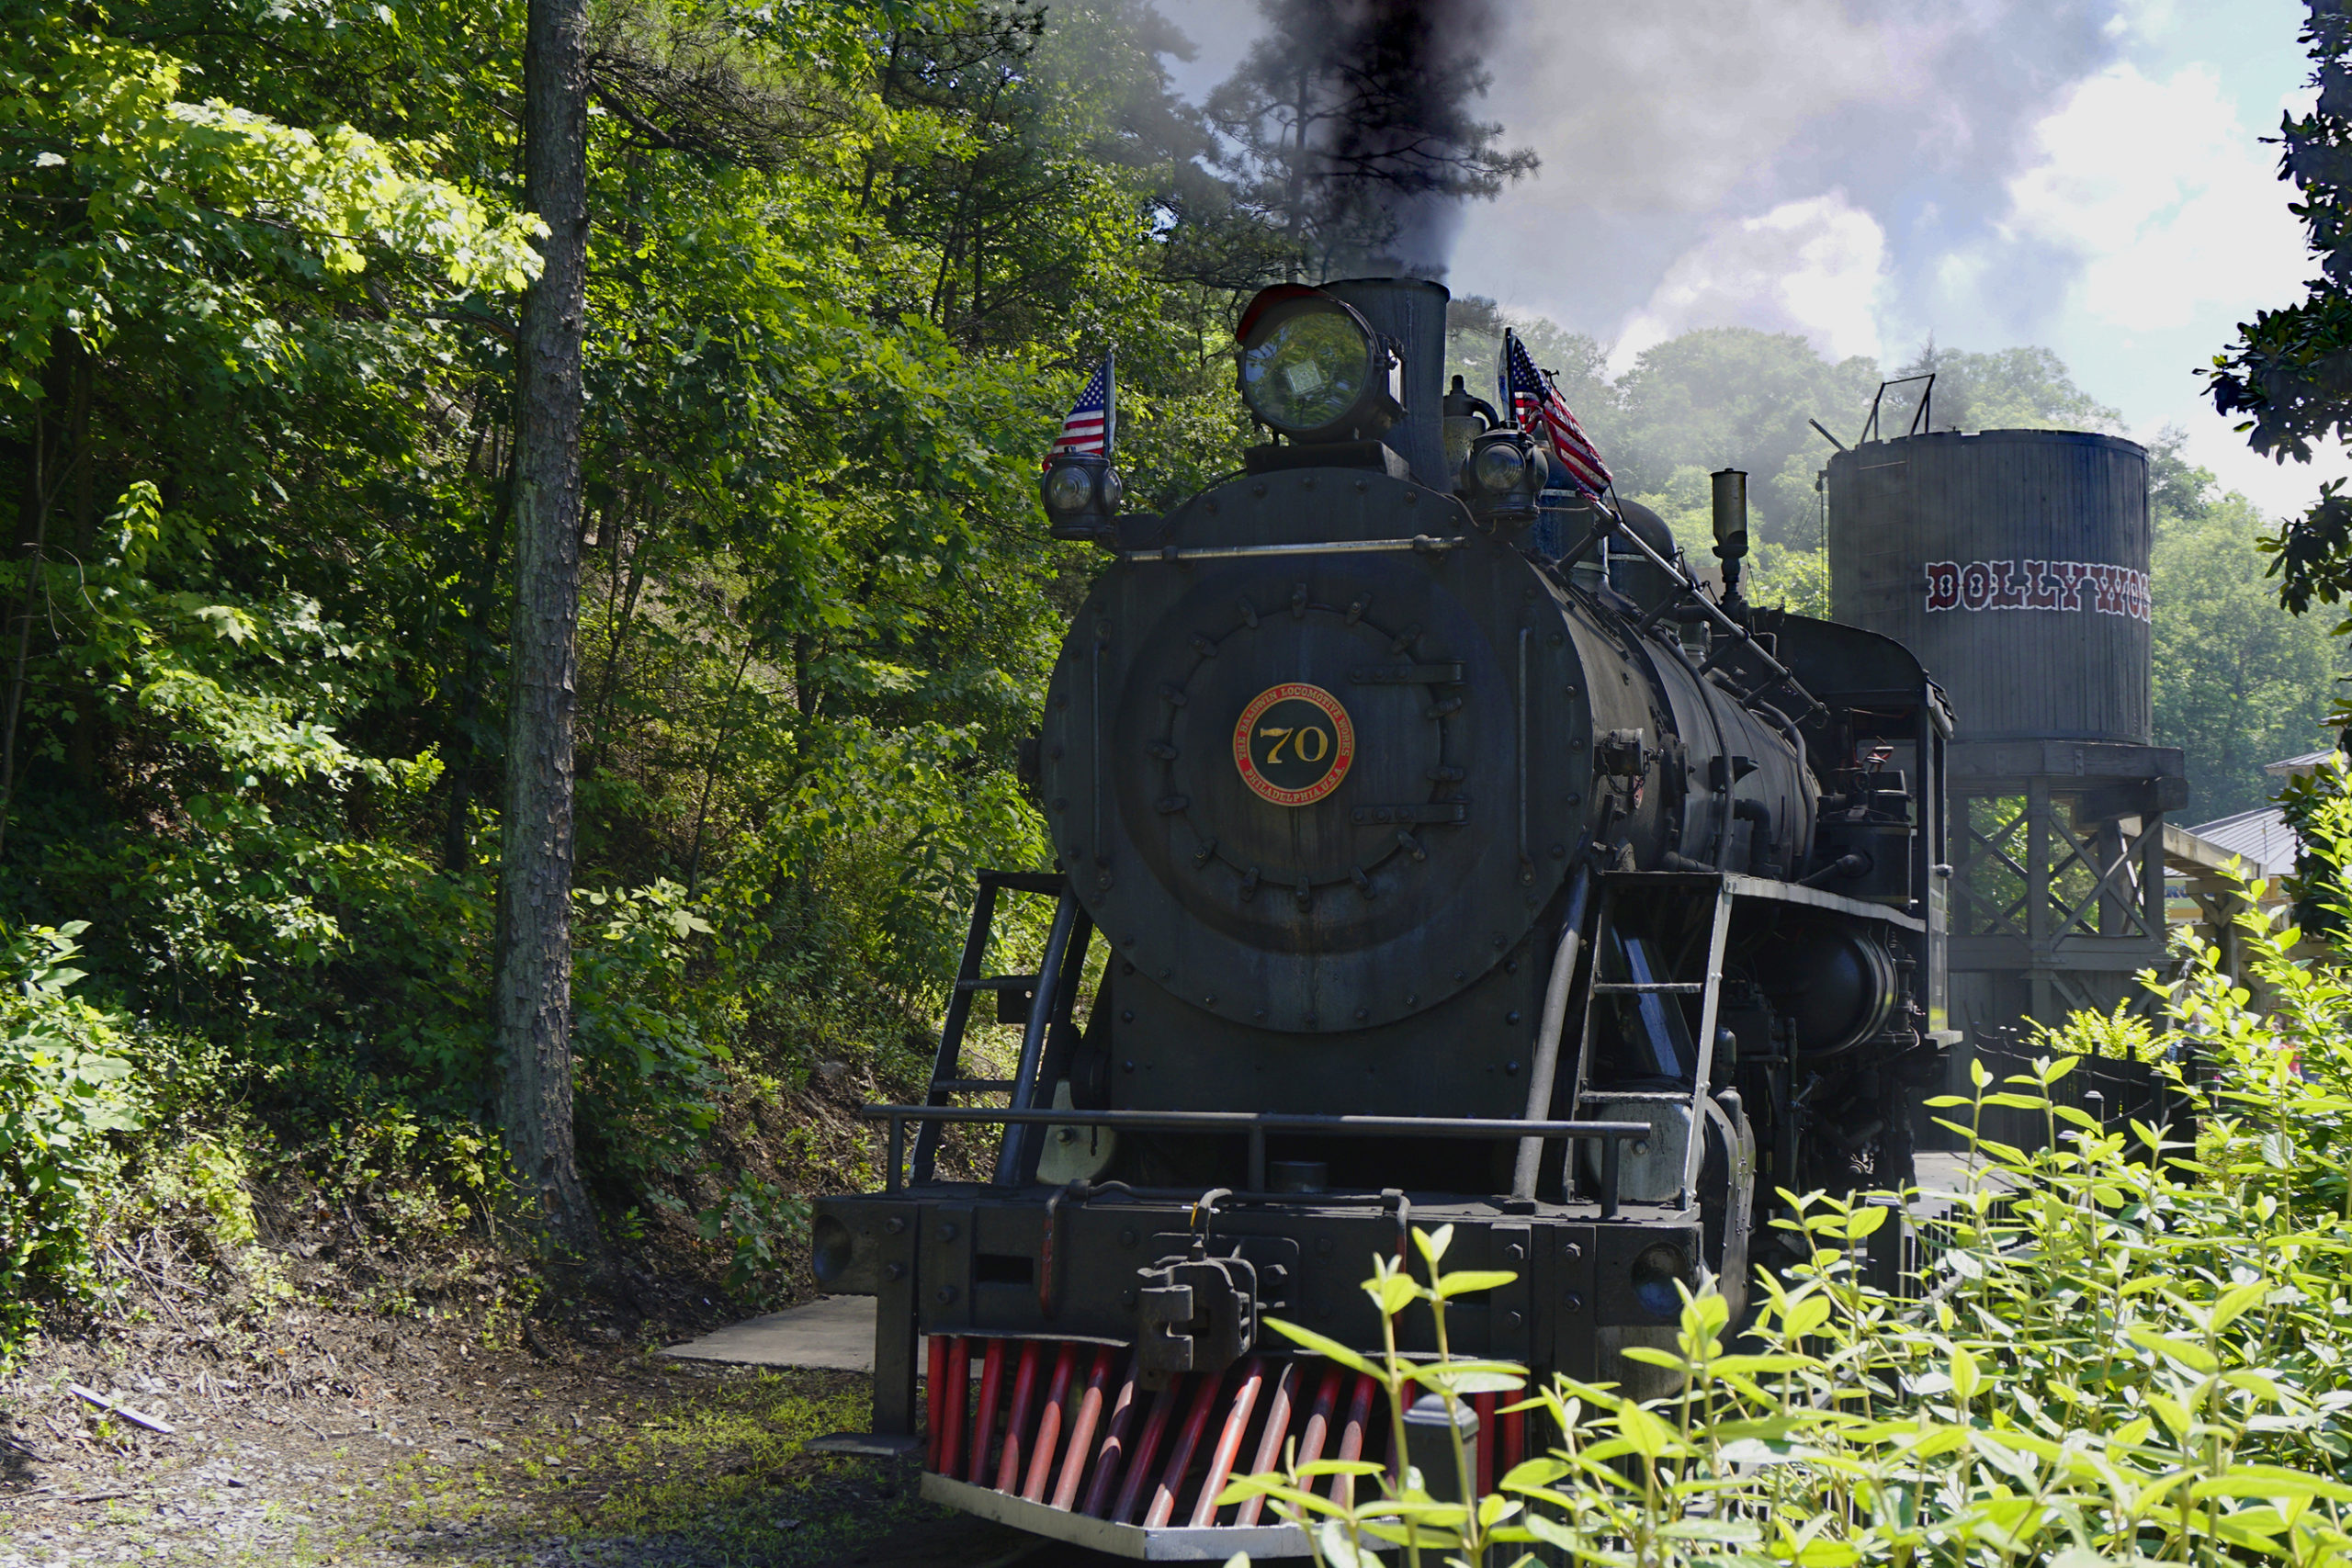 Steam engine pulling the train out of the station at Dollywood amusement park